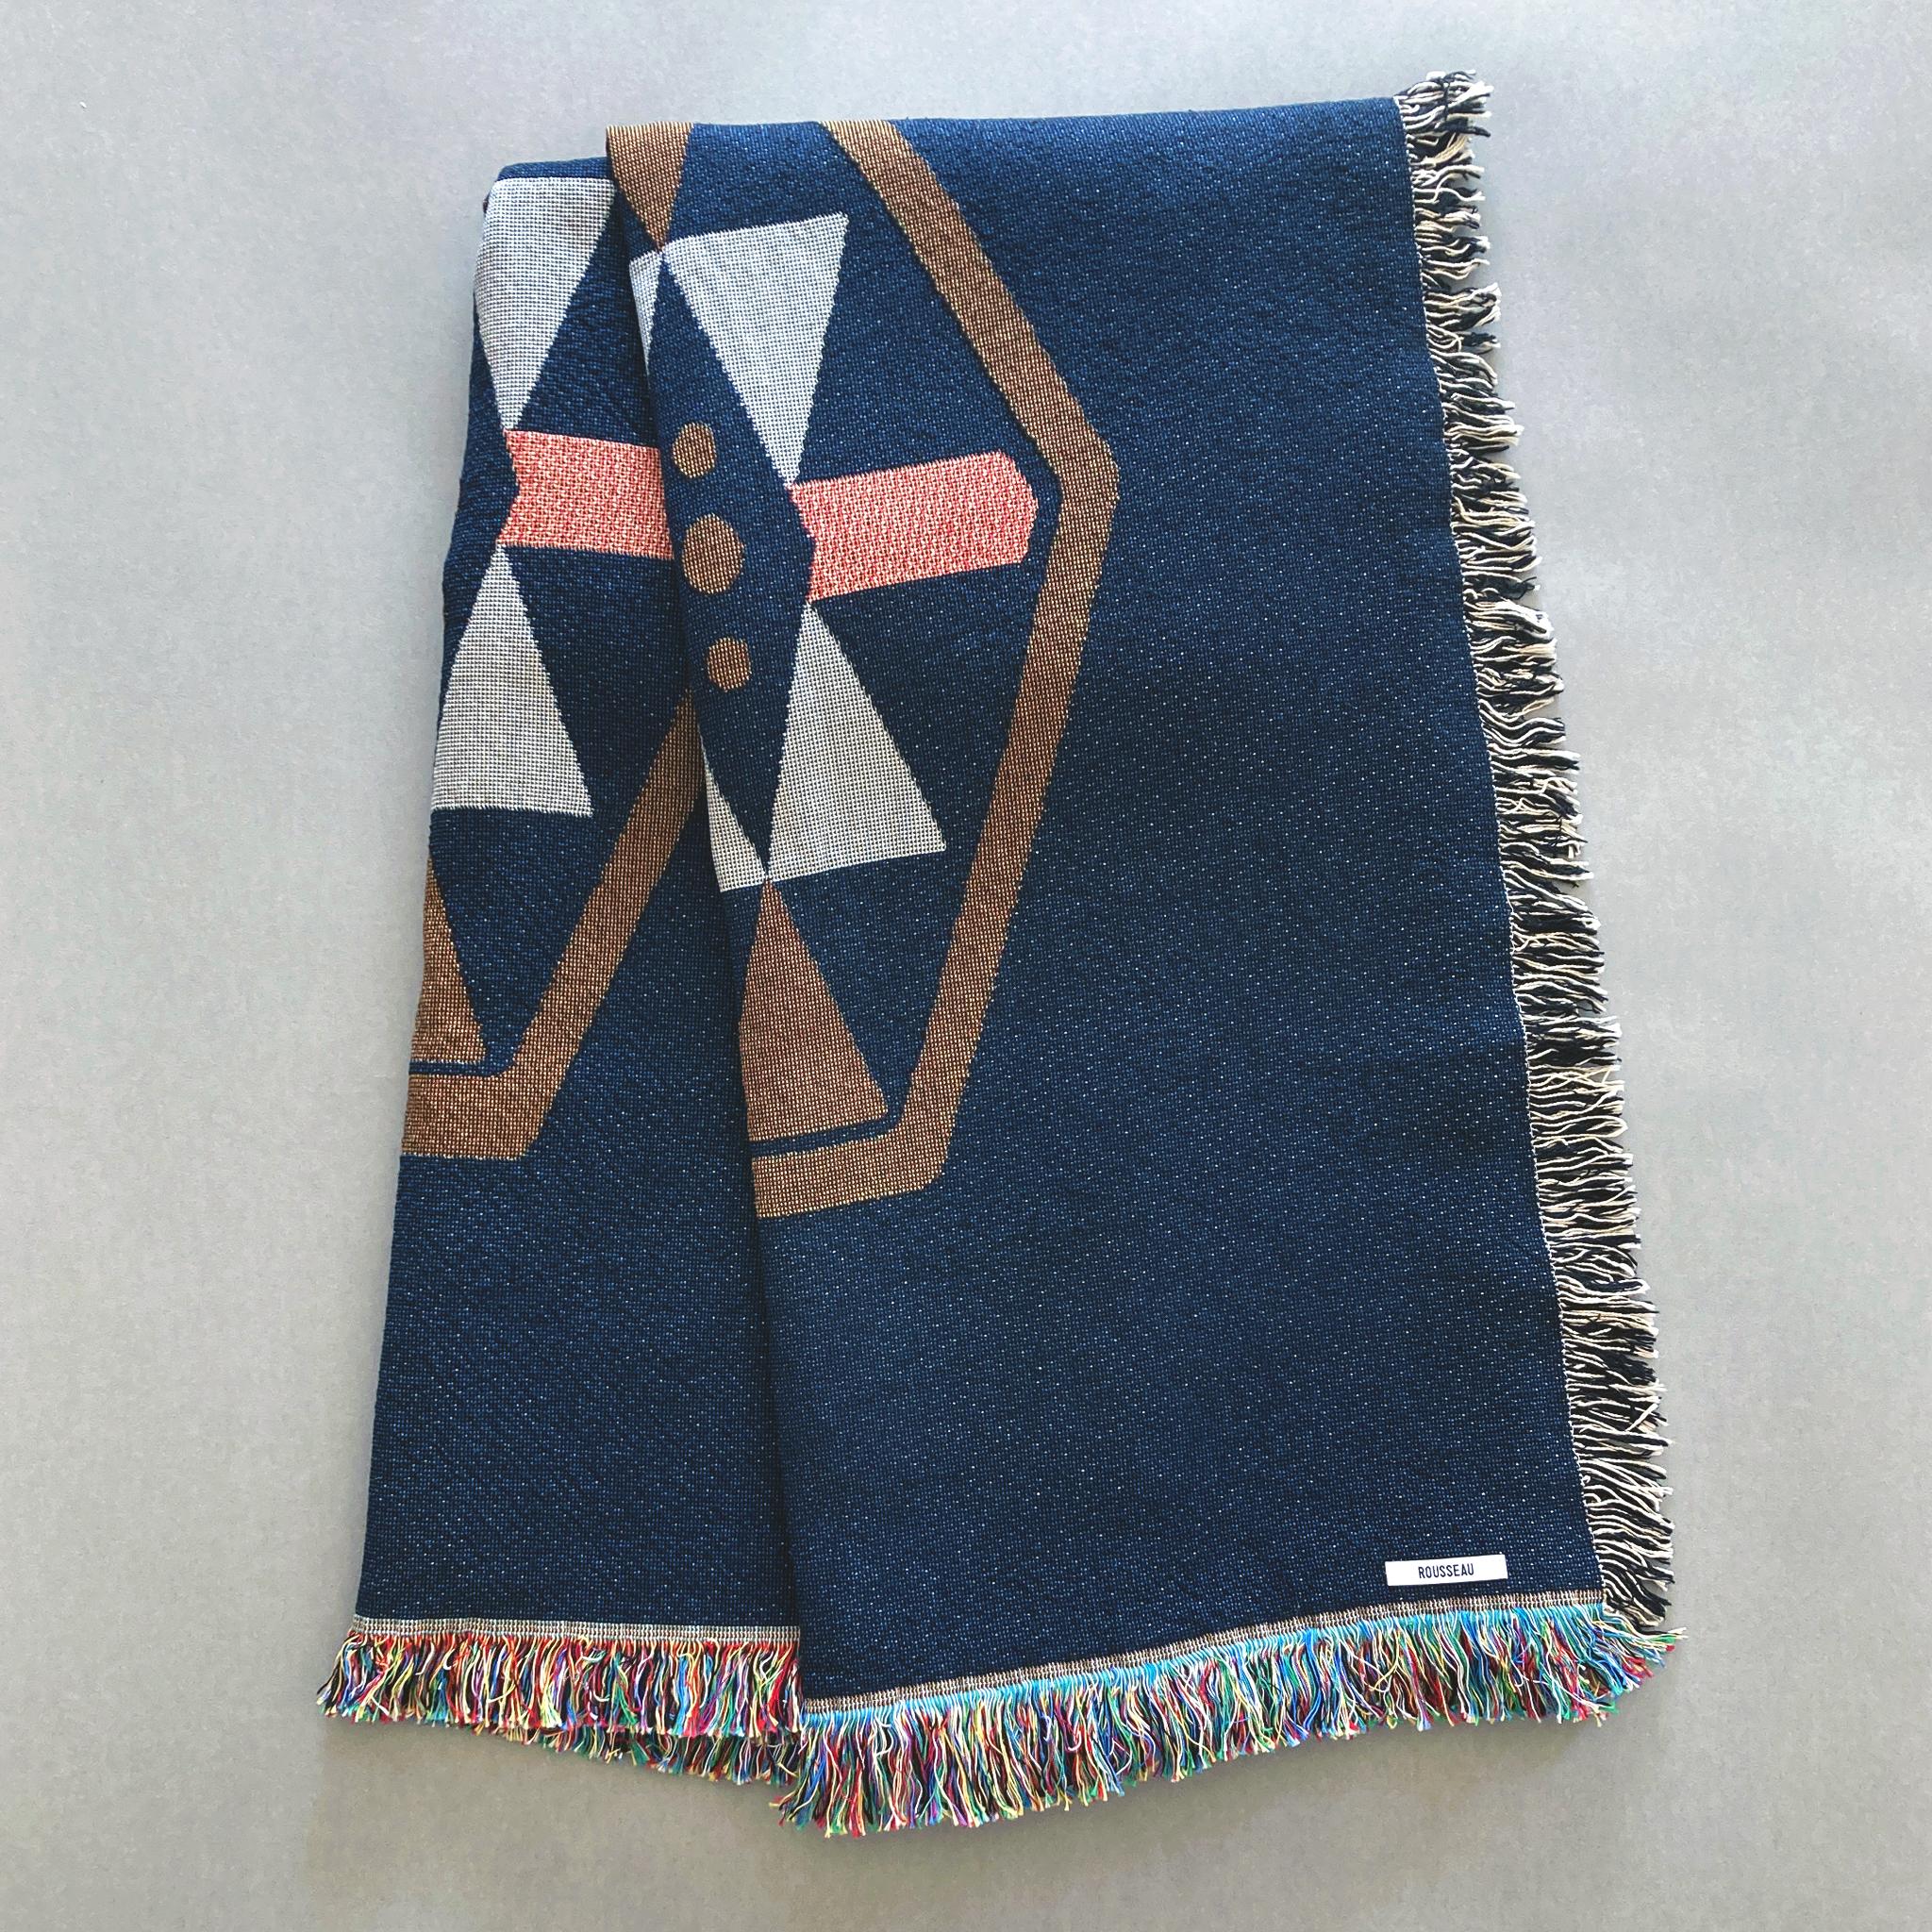 The Twilight Geo throw, petite size, perfect for toddlers or kids. Gray, pink, ochre and navy geometric print woven throw with fringe edge. Woven with recycled cotton on a jacquard loom, made in the US. Each throw measures 40 x 54 inches.

This